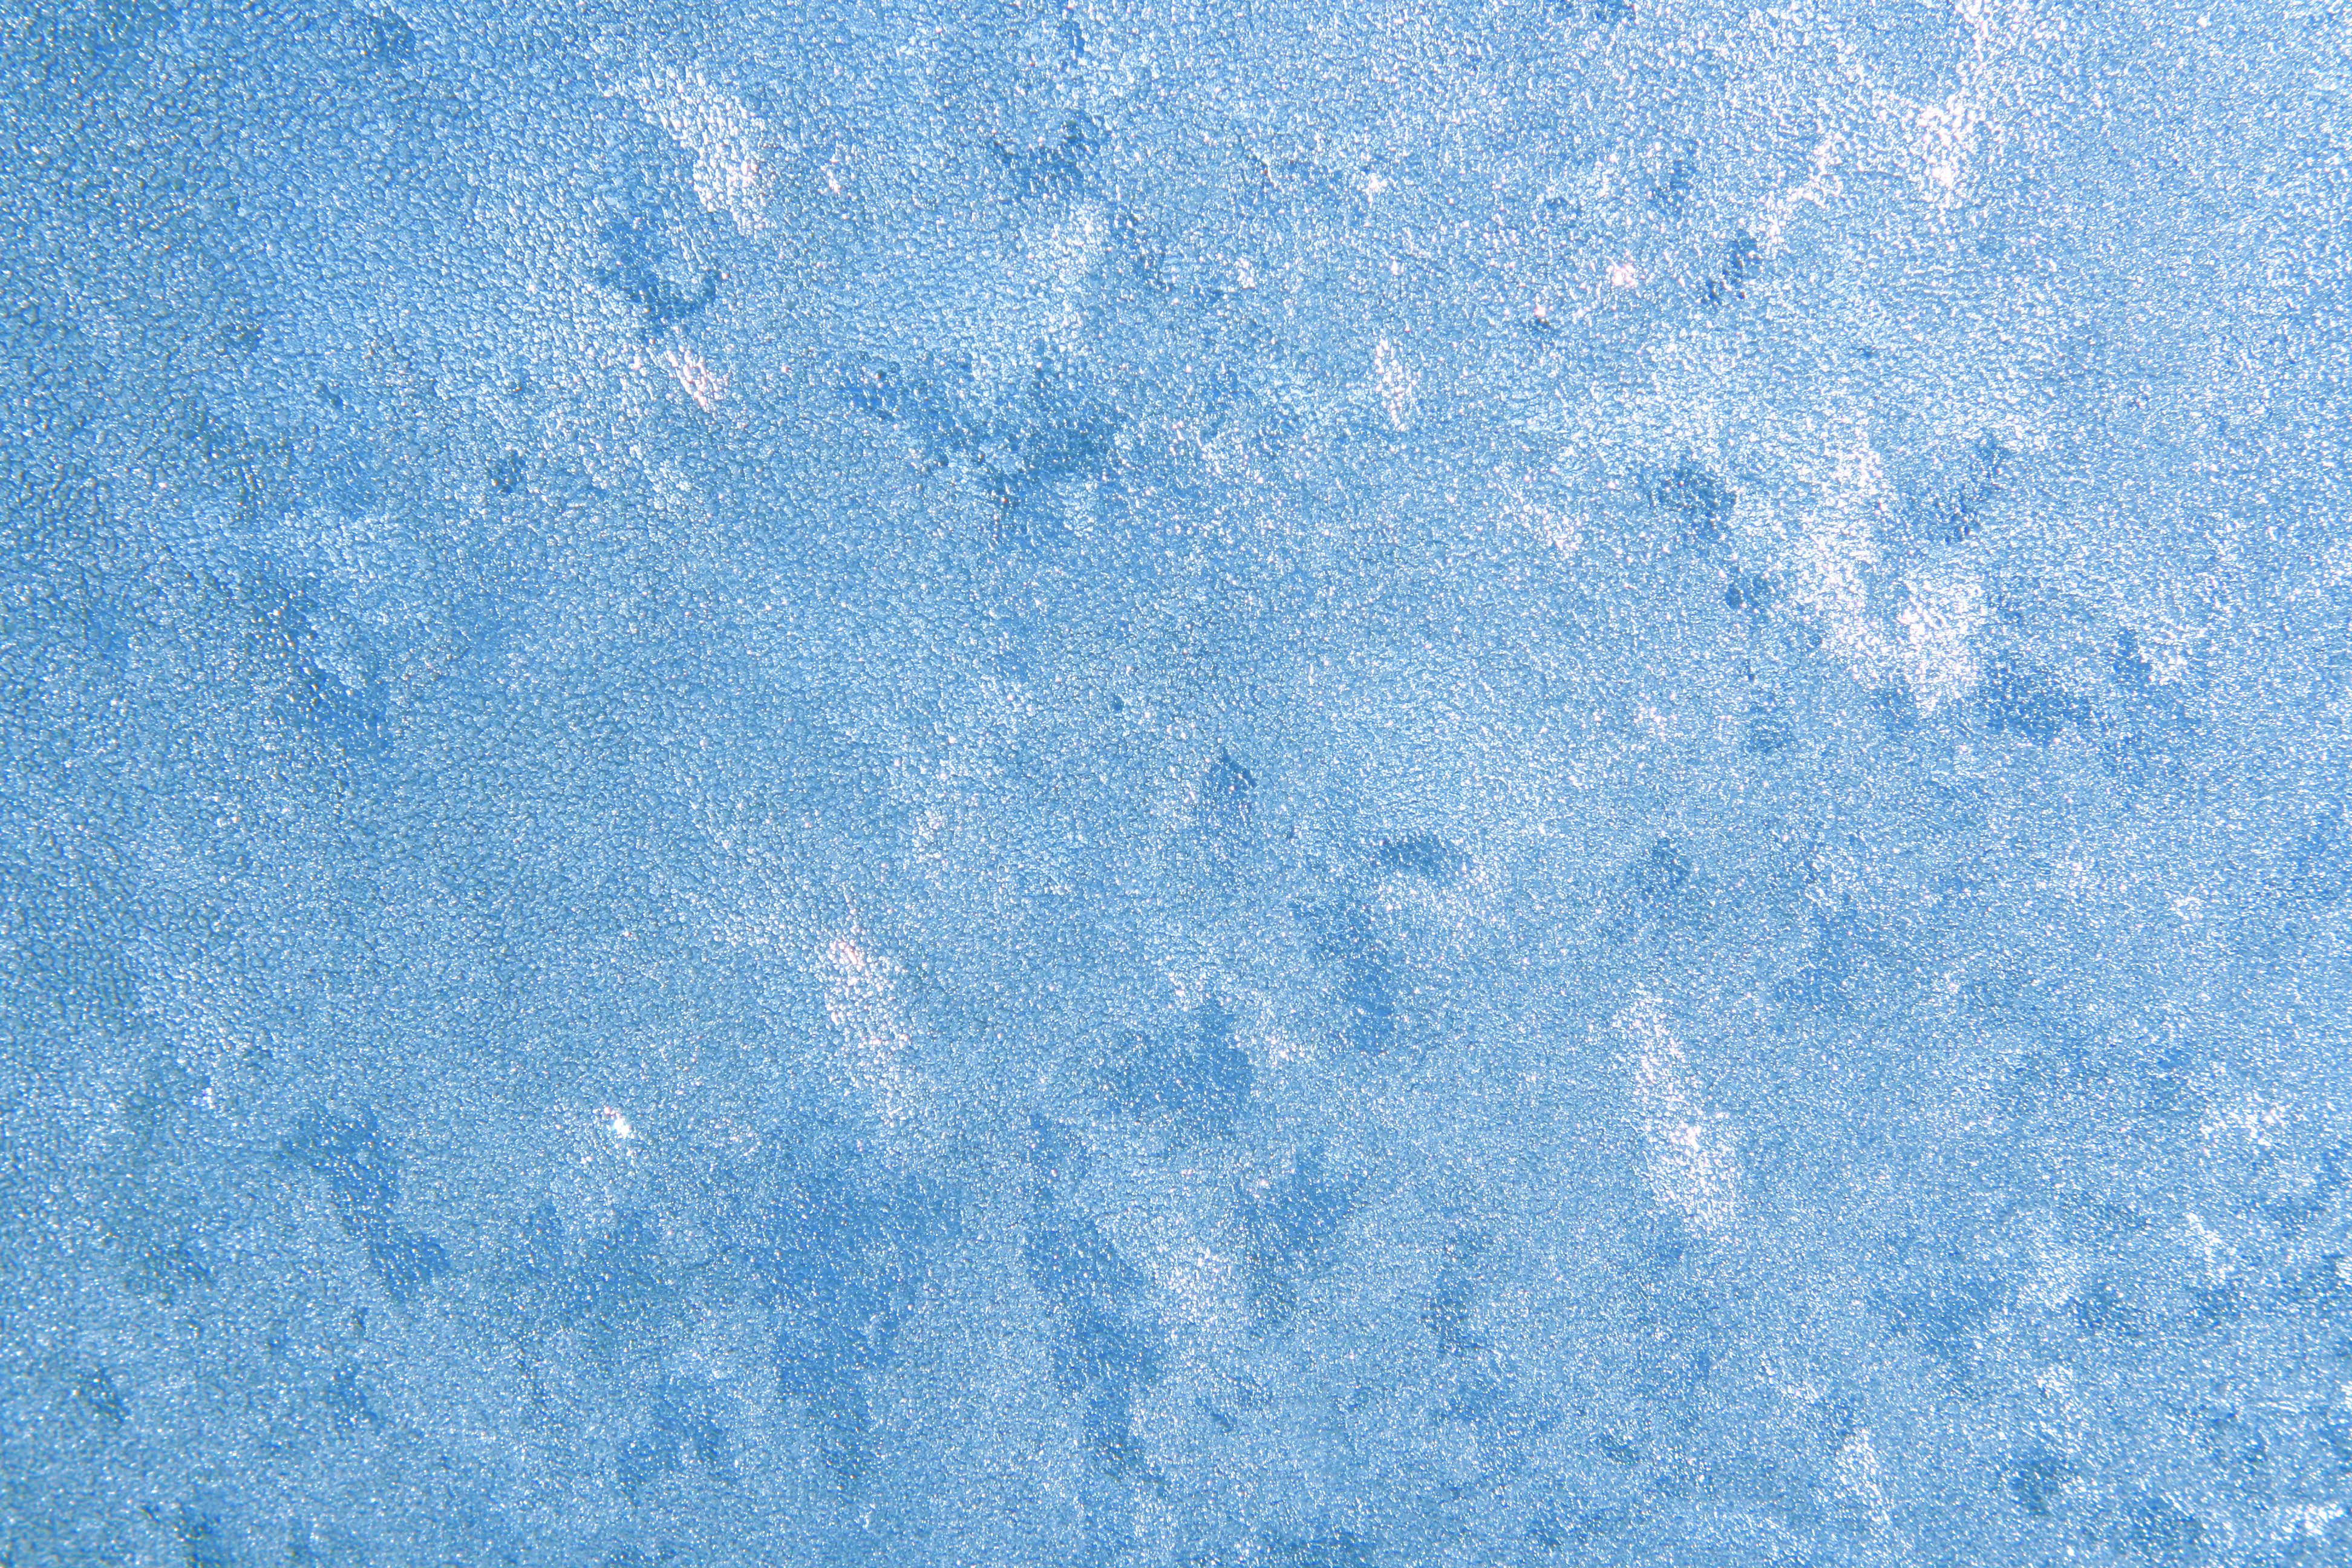 Frost on Glass Close Up Texture Colorized Sky Blue Picture | Free ...